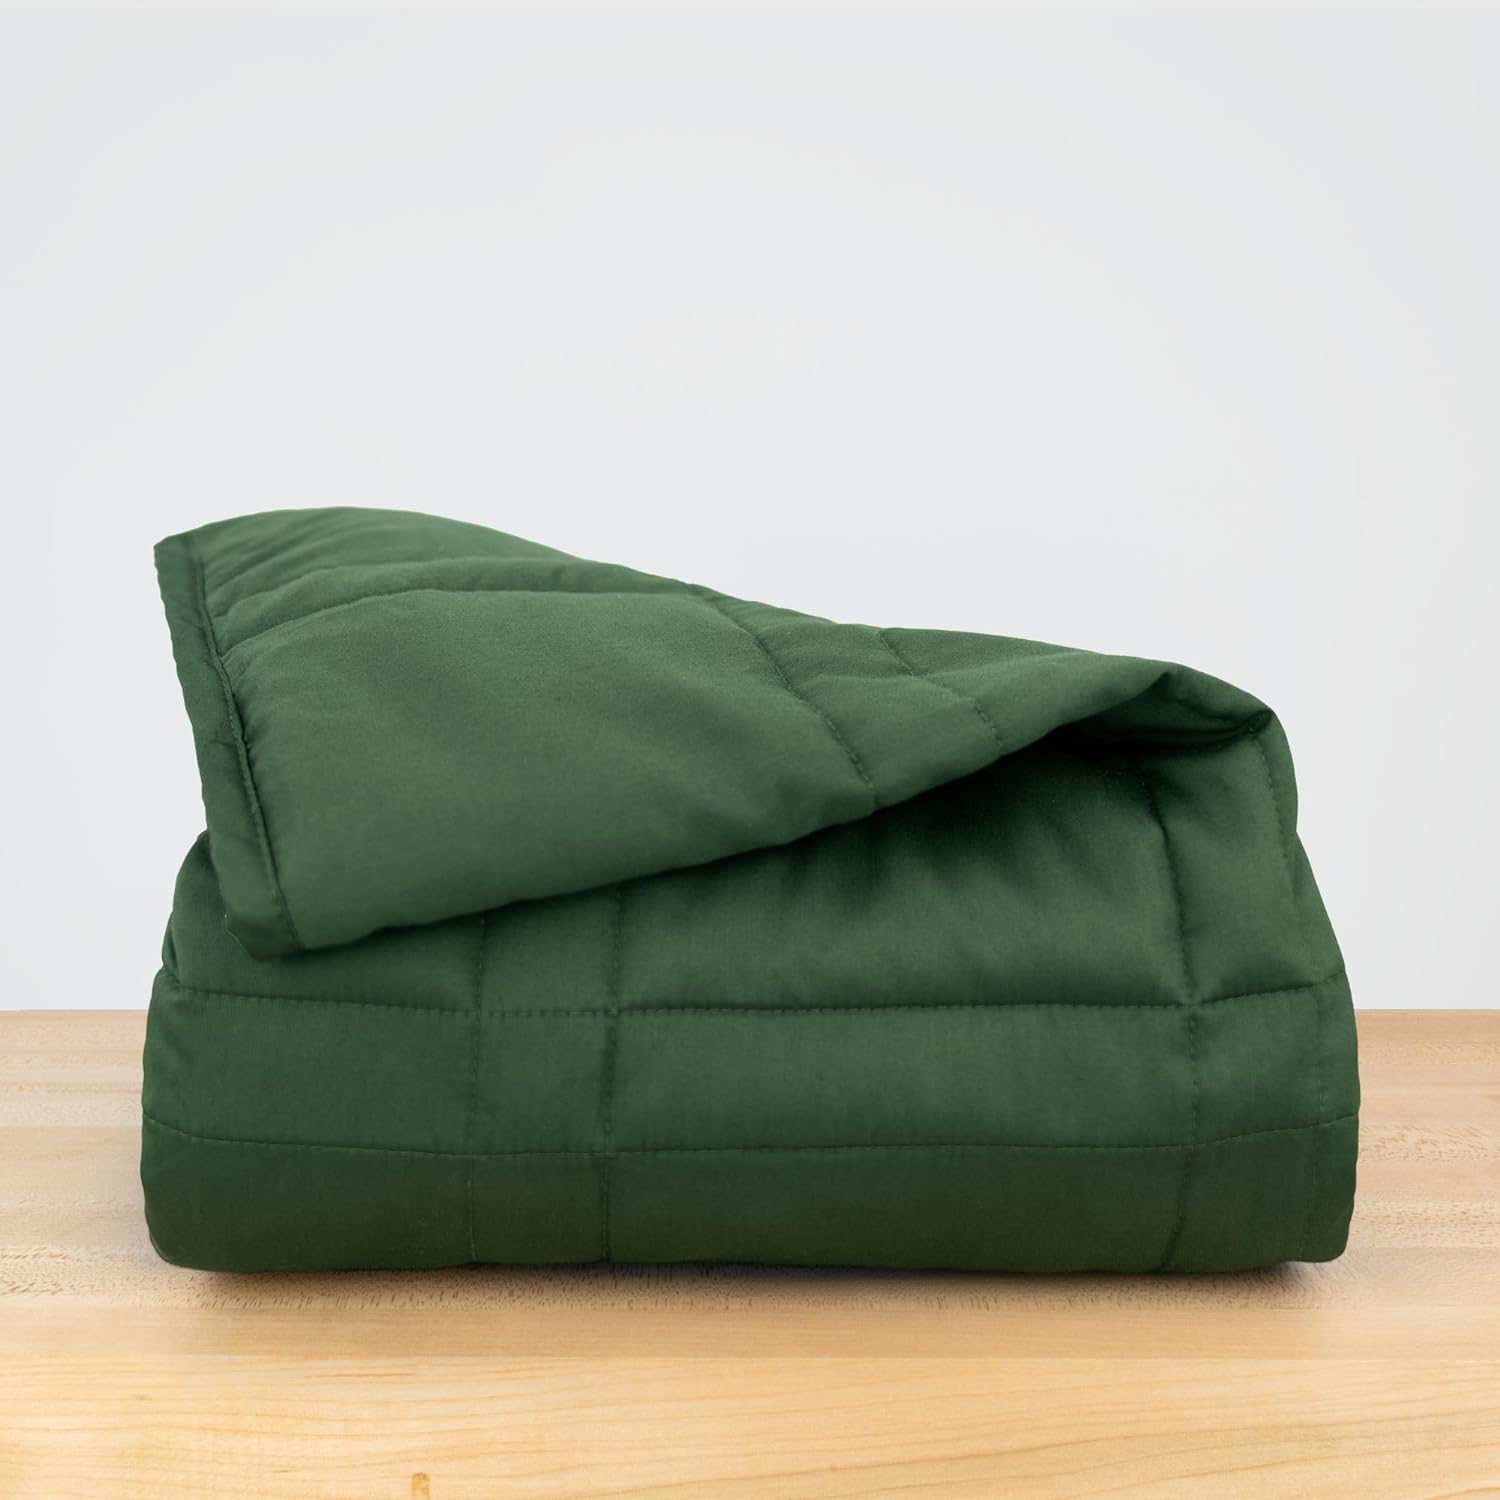 Weighted Blanket, Eco-Friendly, Chemical-Free, Soft Cool Cotton in Vegetable Dyed